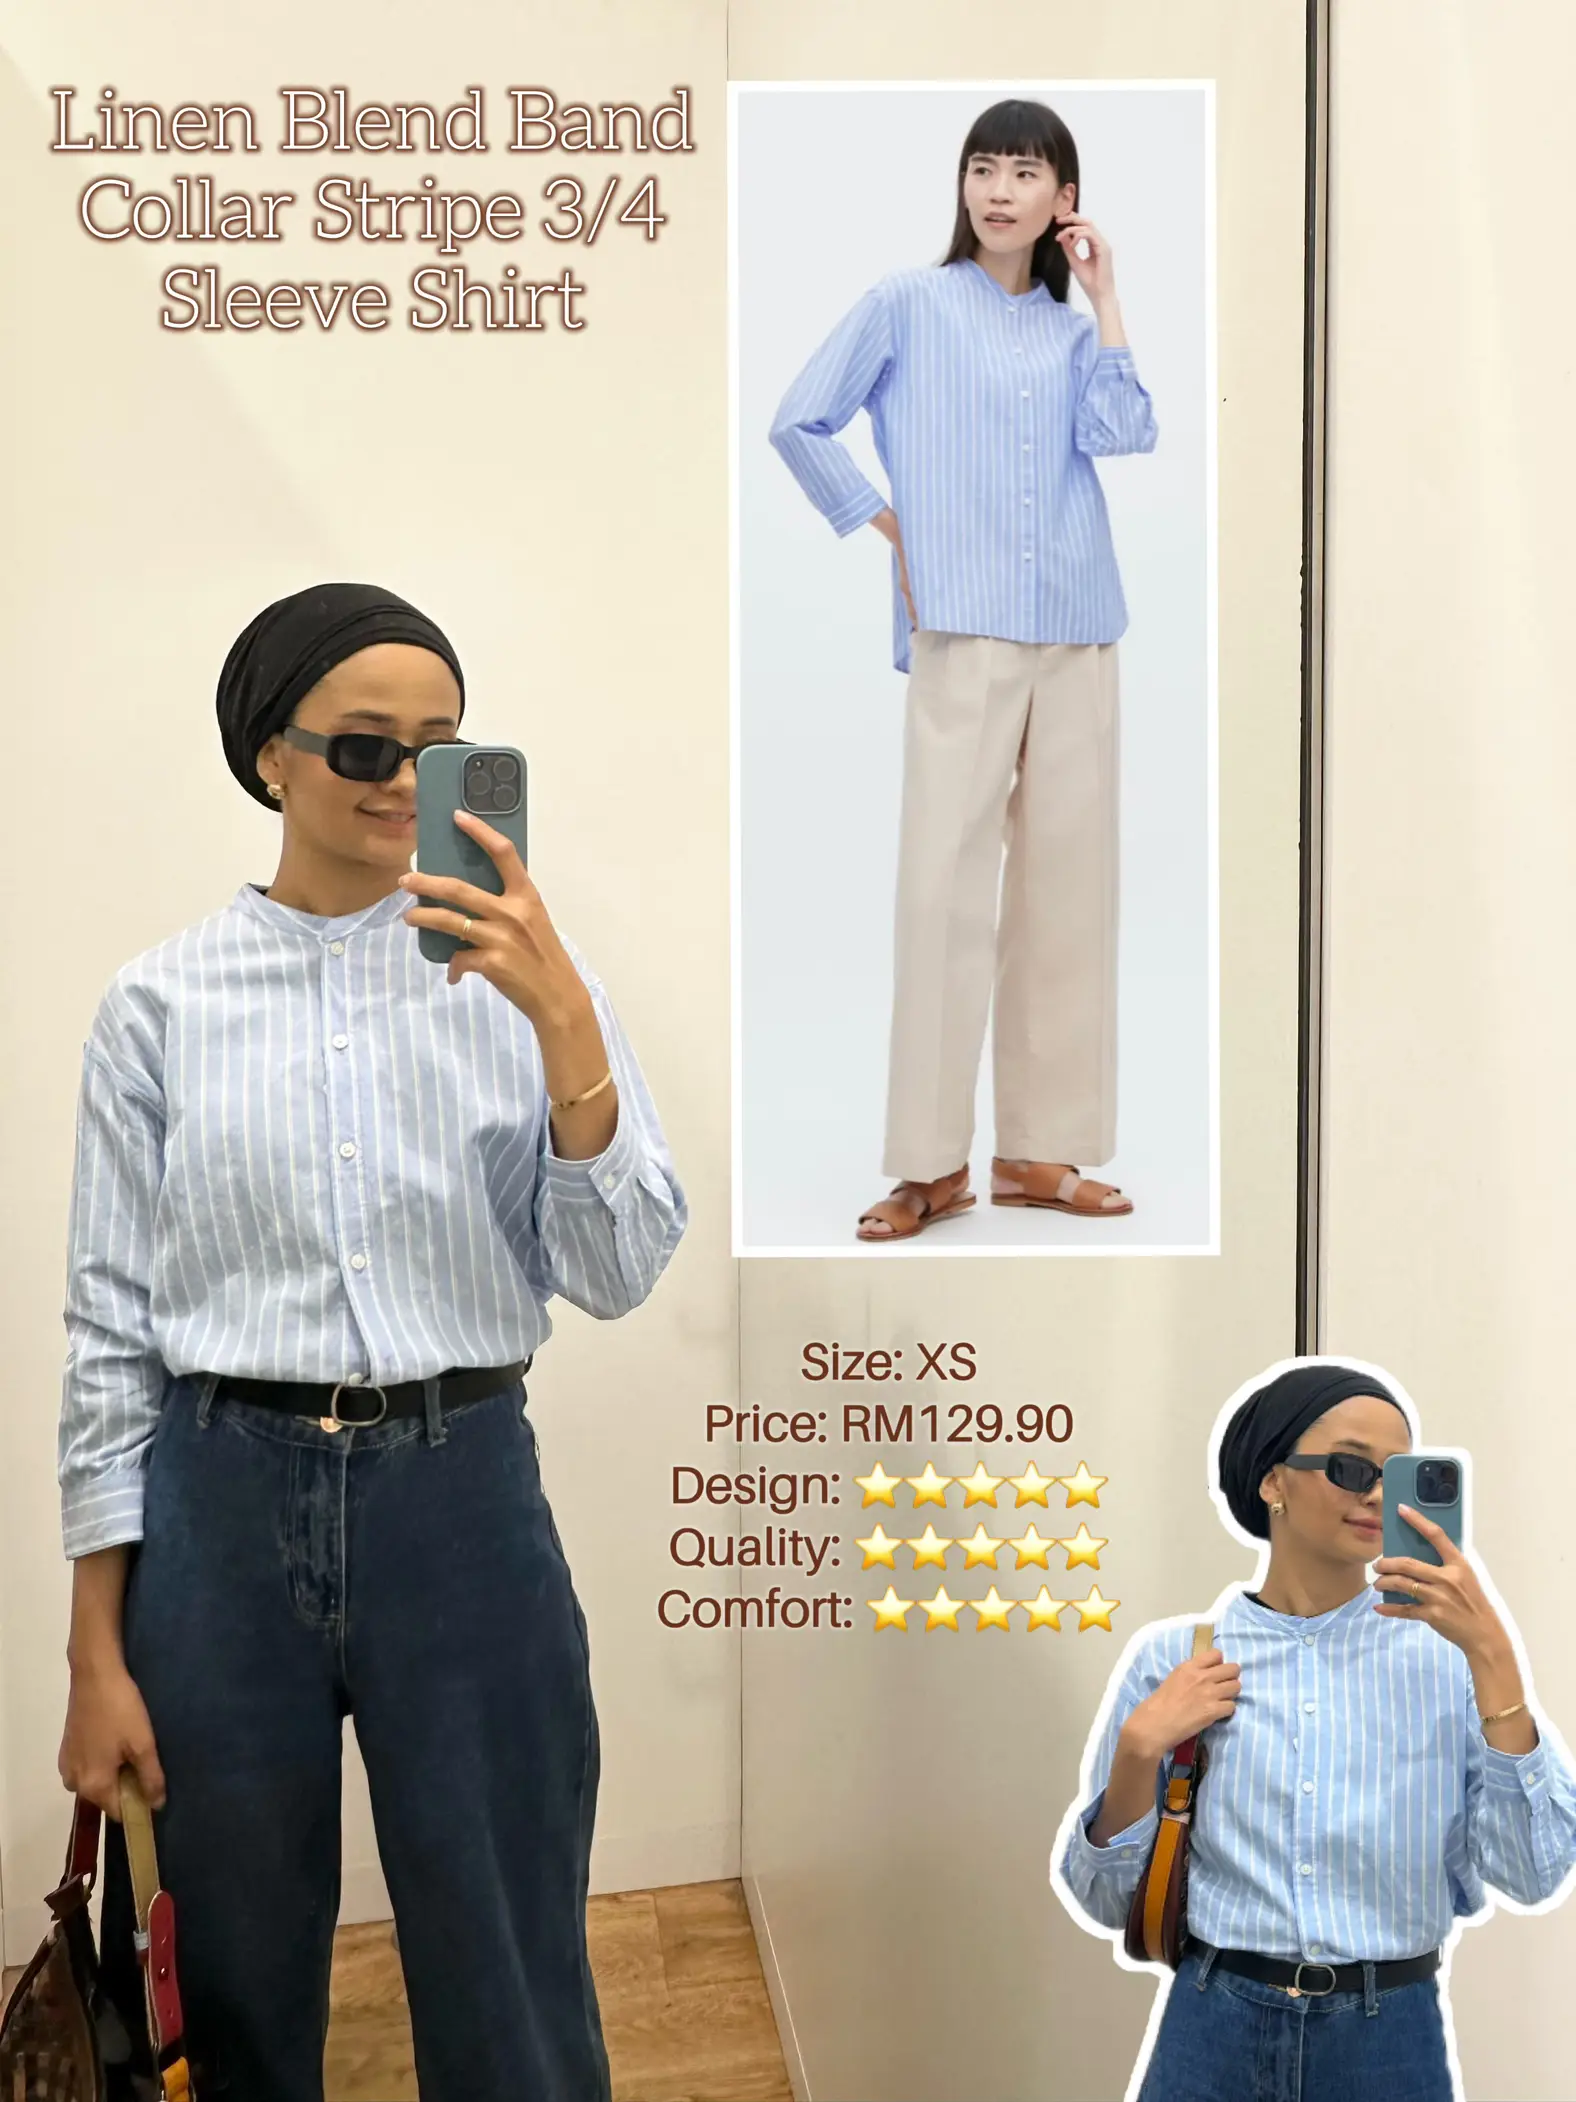 Modest Outfit You Could Find In UNIQLO, Galeri disiarkan oleh Farahinain